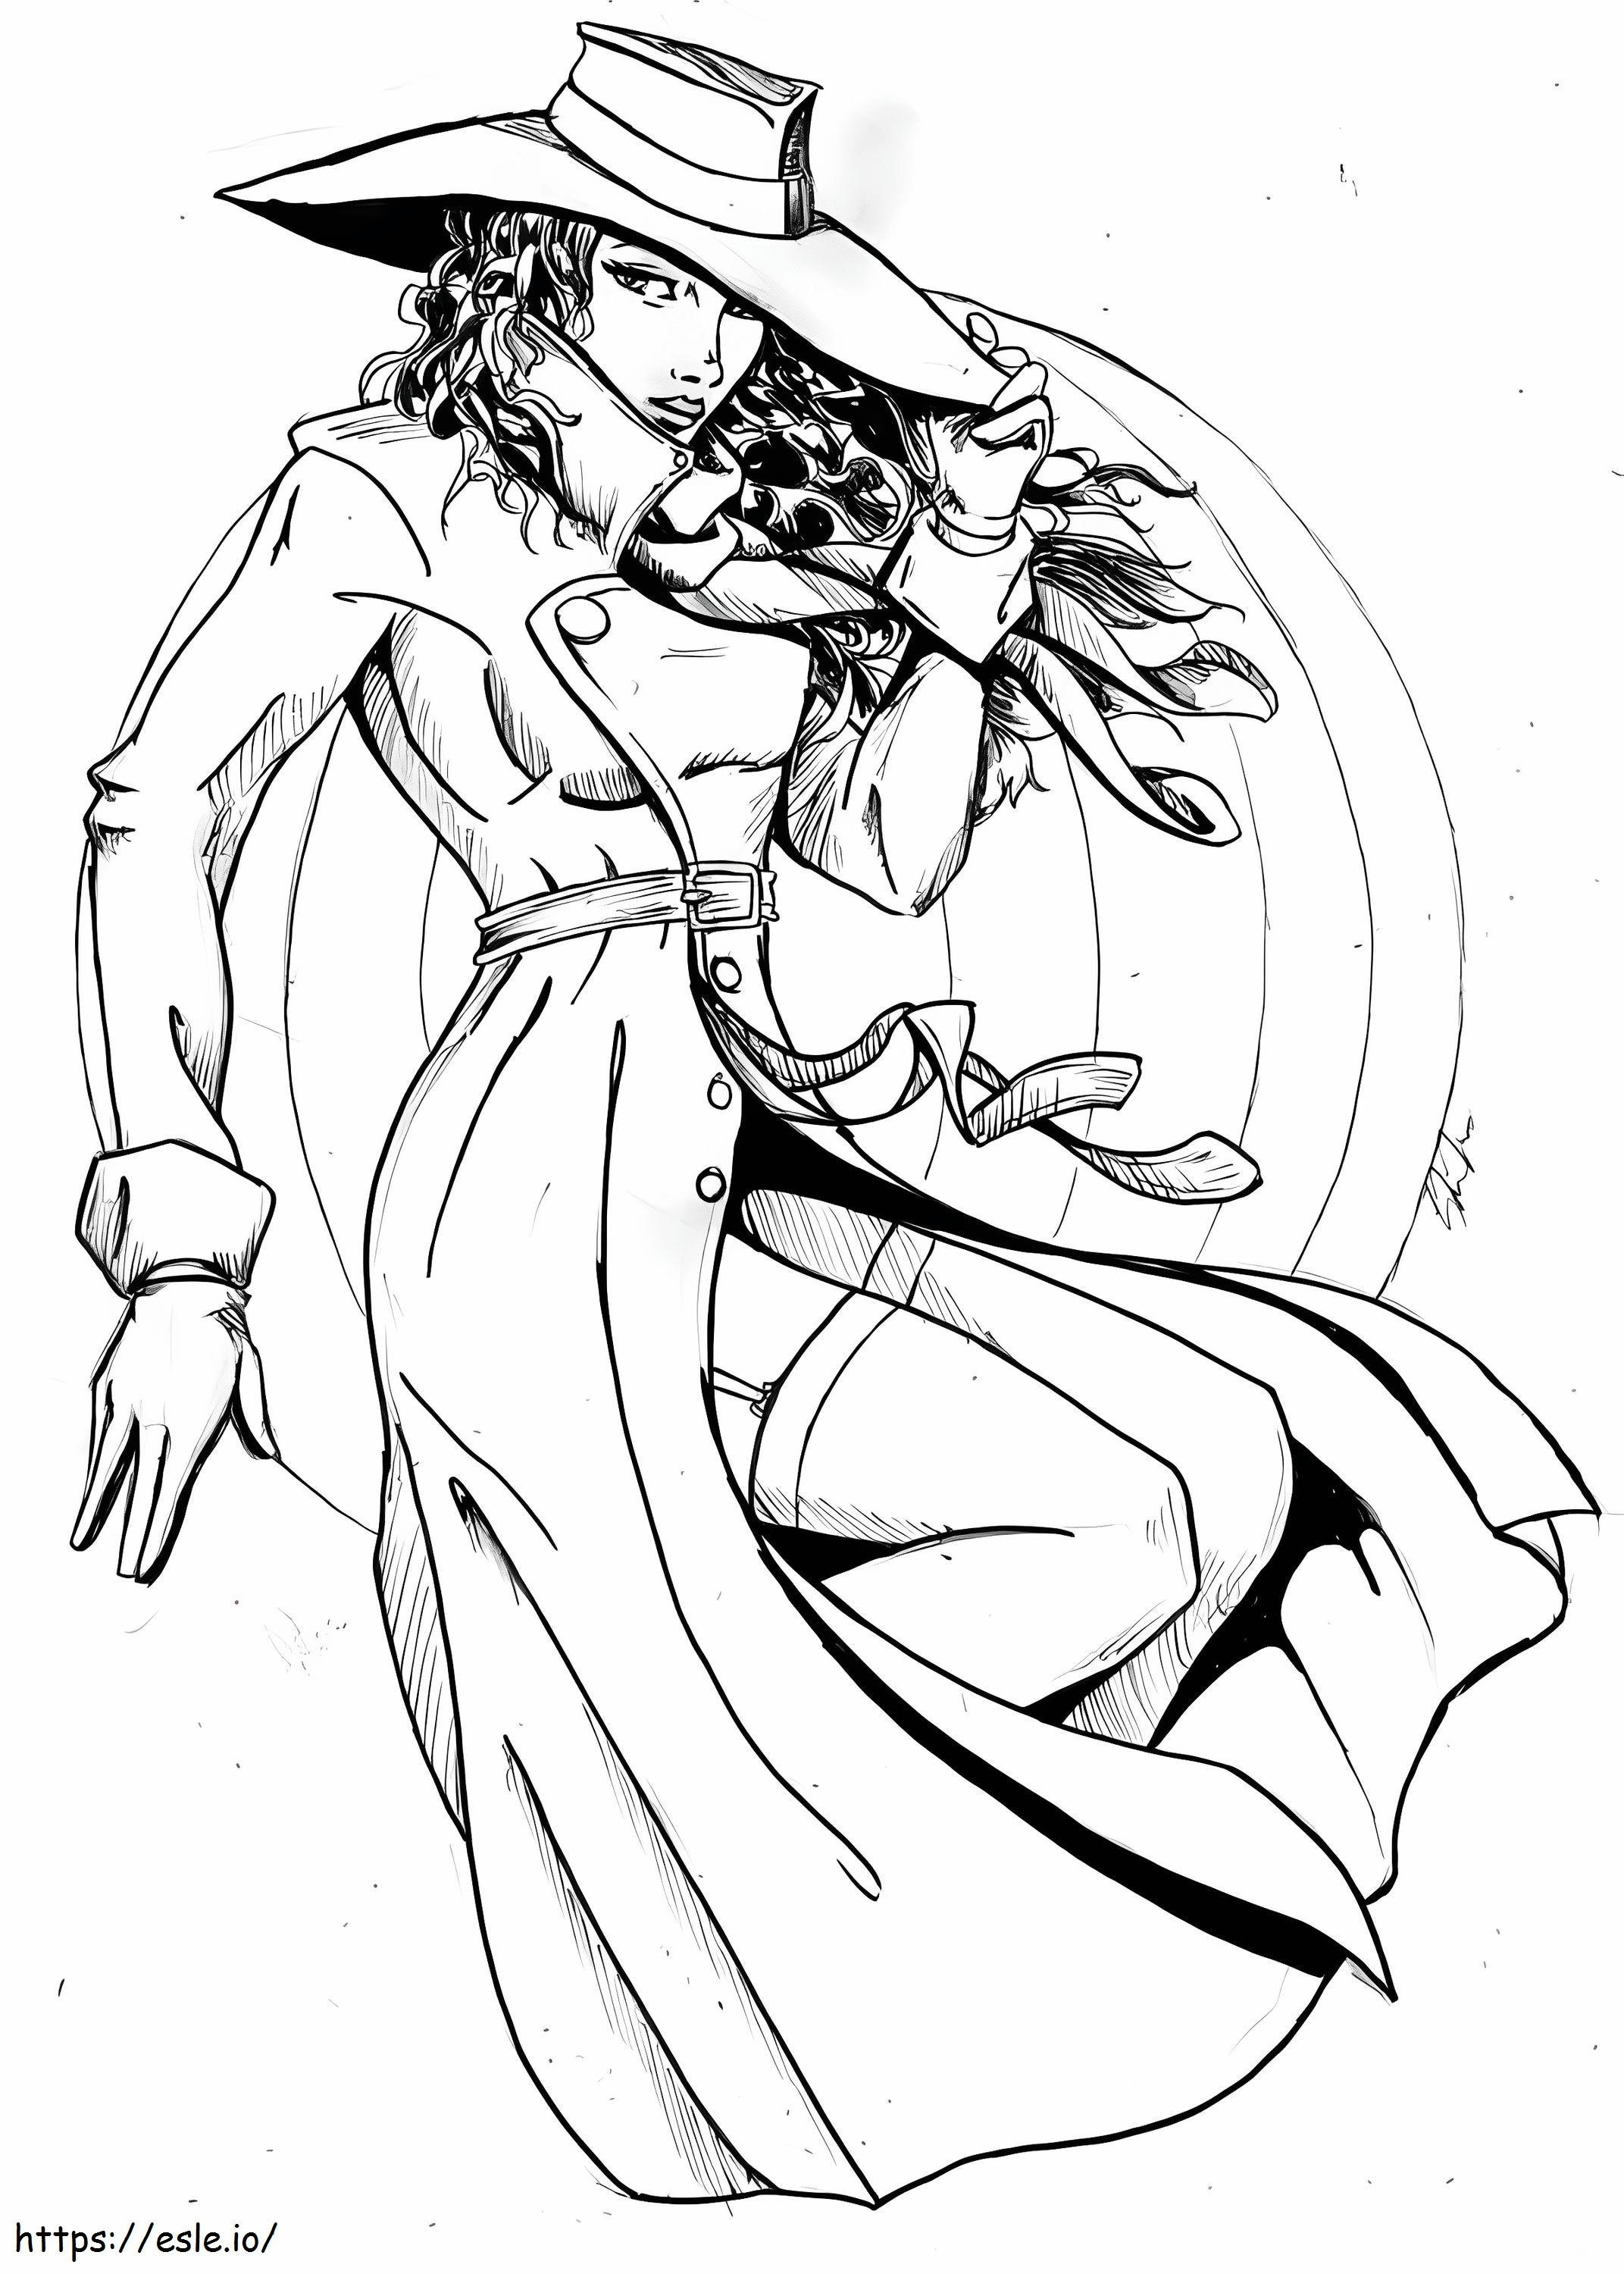 Cool Carmen Sandiego coloring page